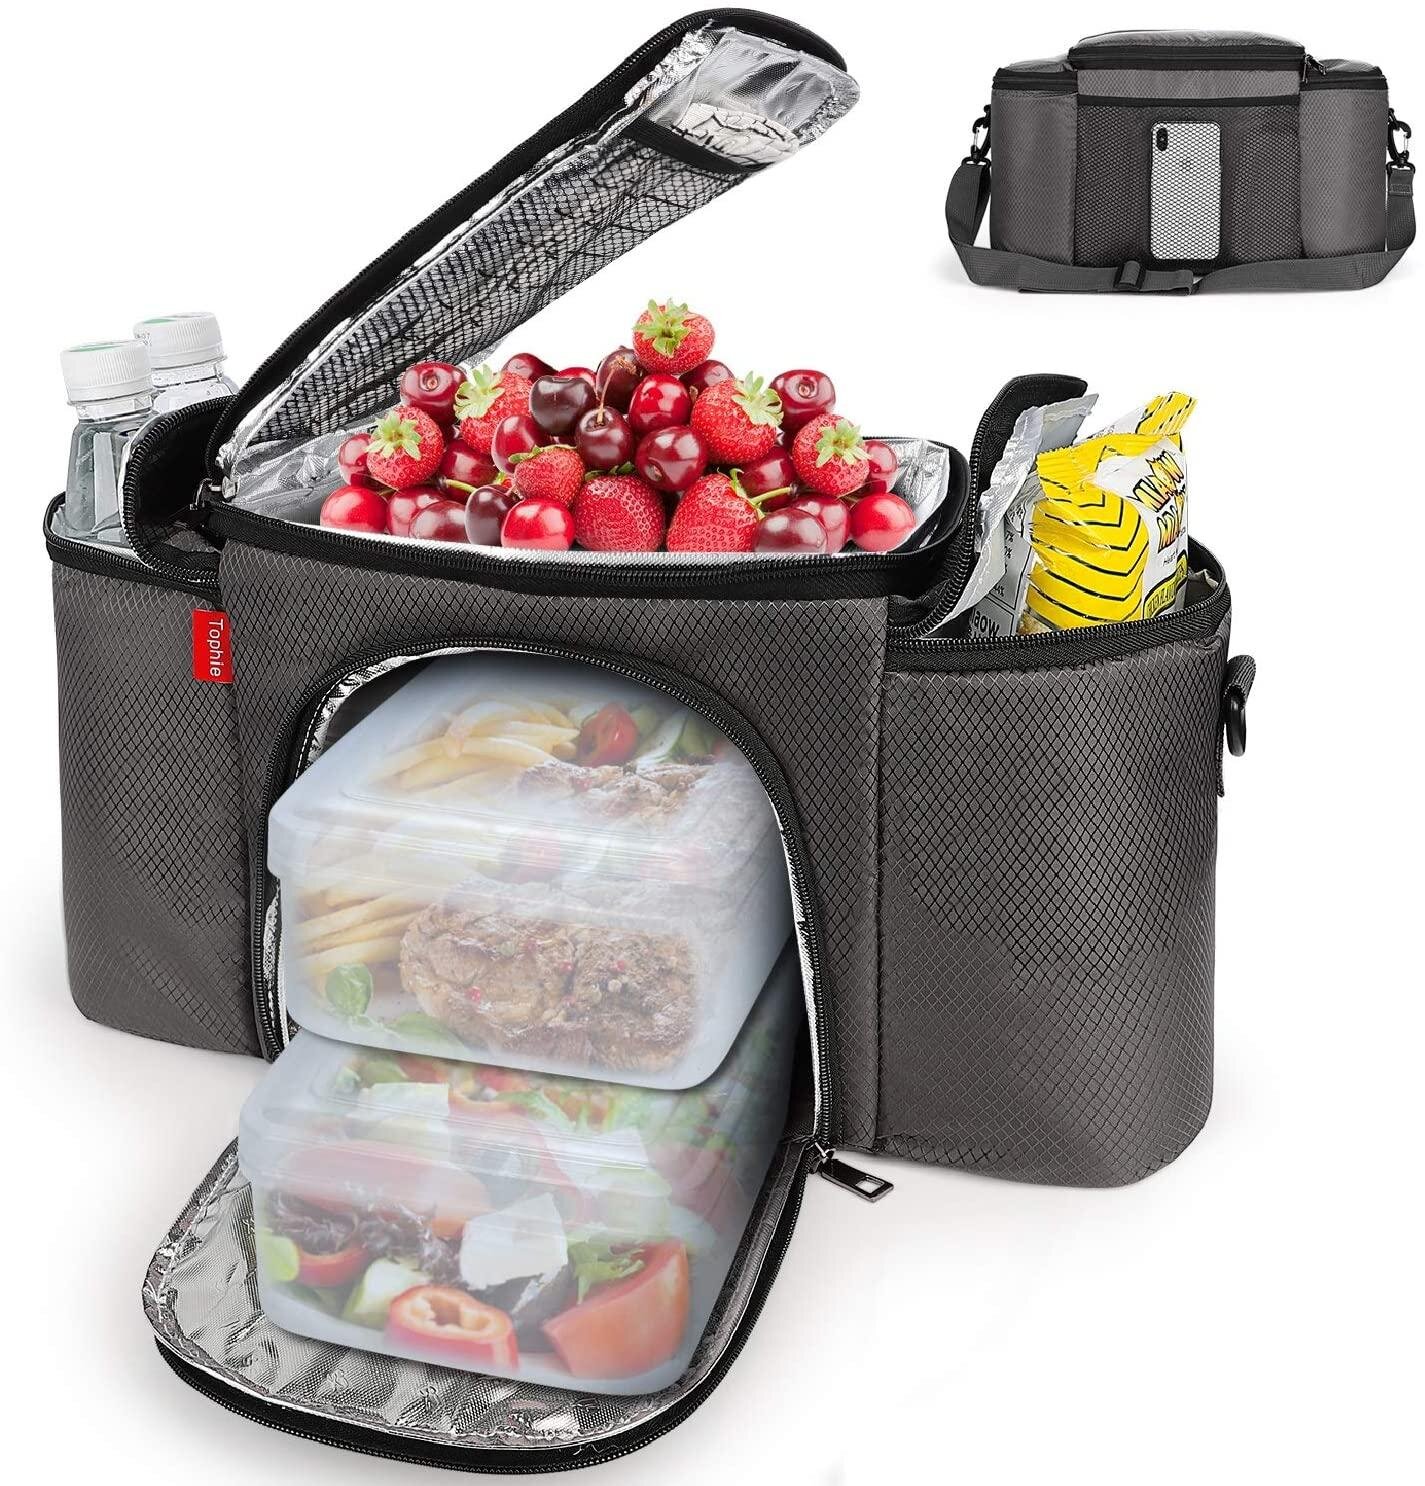 Reusable Insulated Meal Prep Lunch Bags for Women Men Kids Leakproof Freezable Cooler Bag Durable Tote Bag Fashionable Lunchbox Container for Work School Picnic Meal Prep Container Dark Grey 